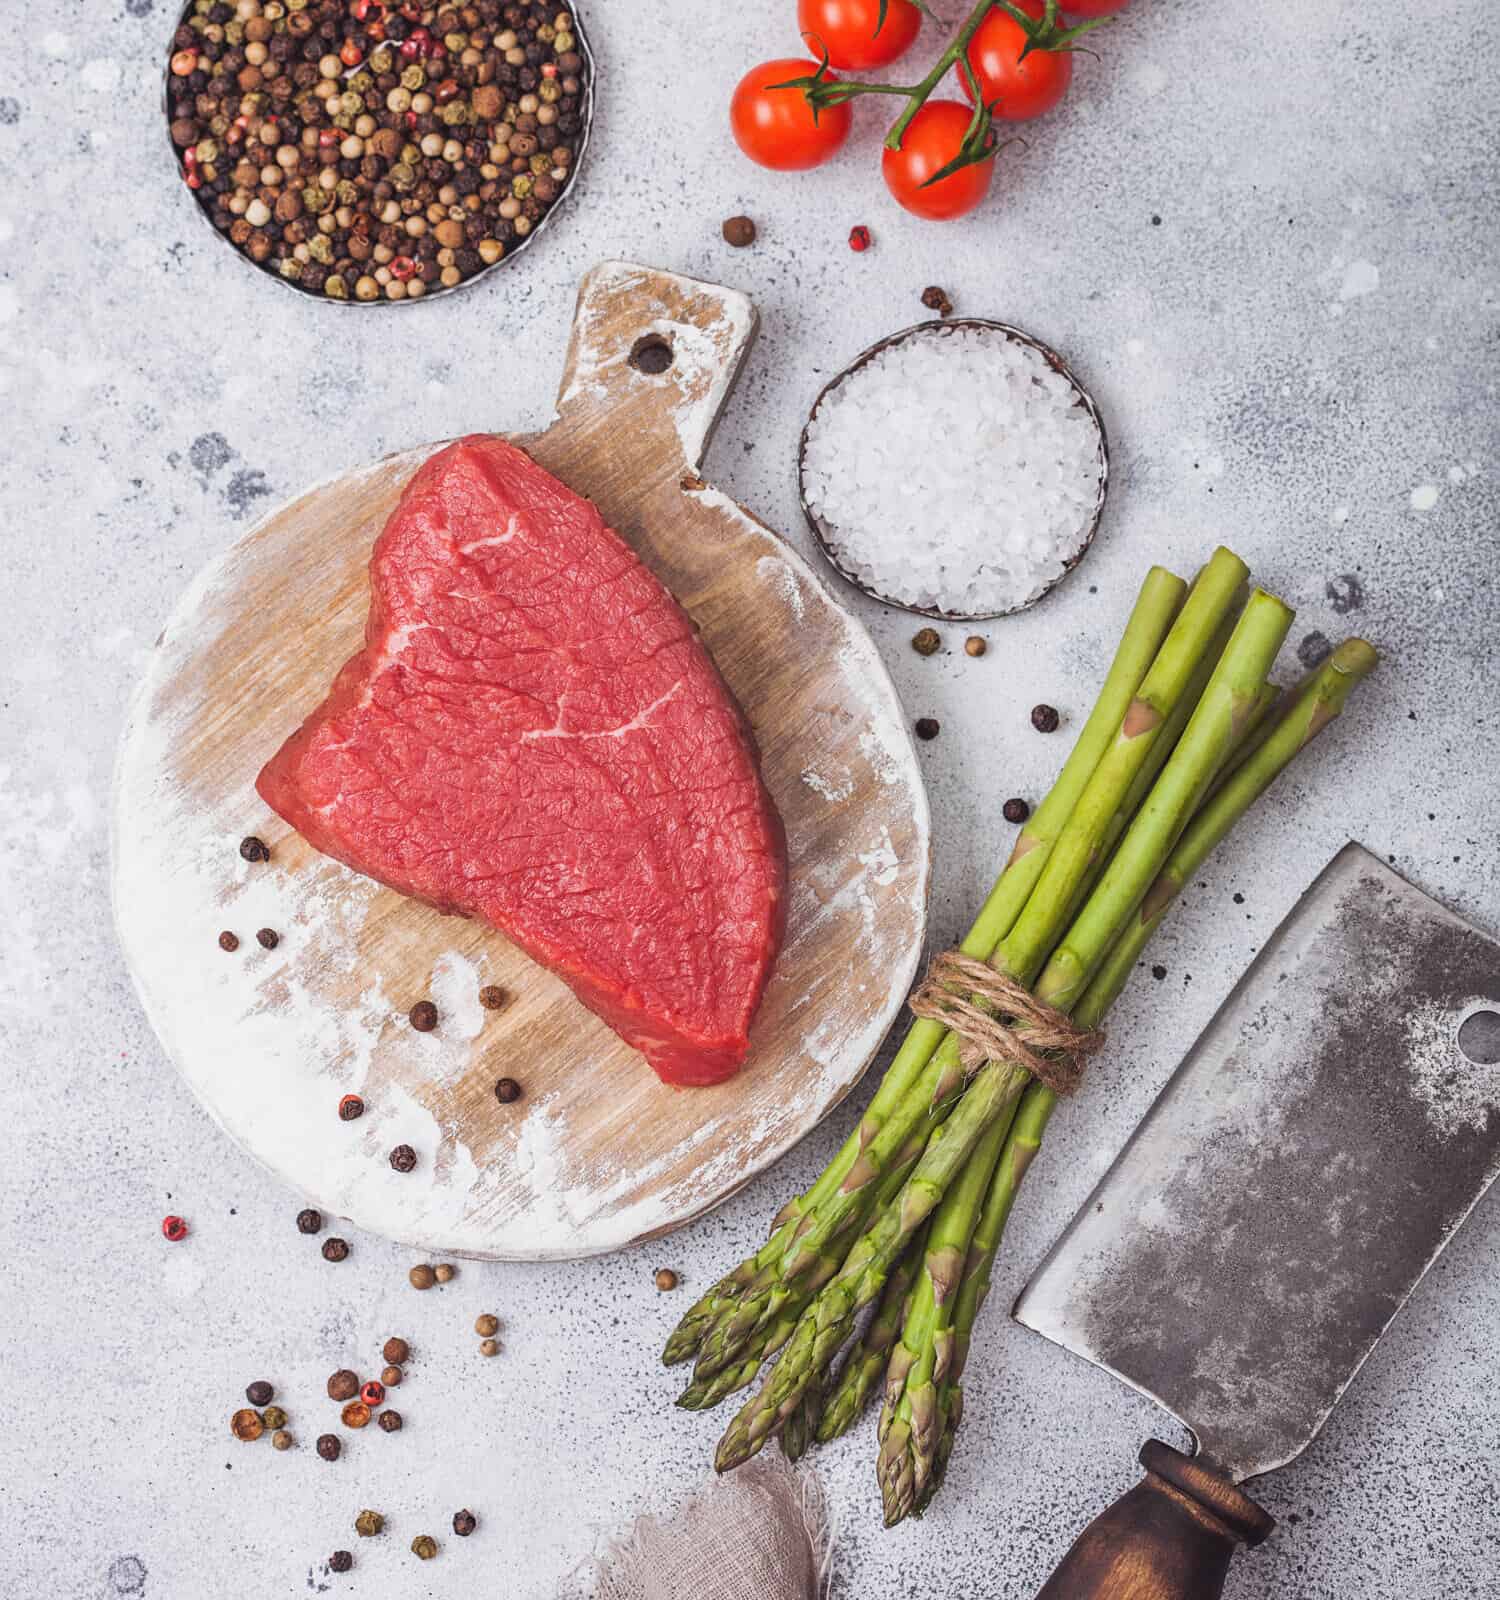 Slice of Raw Beef sirlion steak on round chopping board with tomatoes,garlic and asparagus tips and meat hatchet on light kitchen table background.